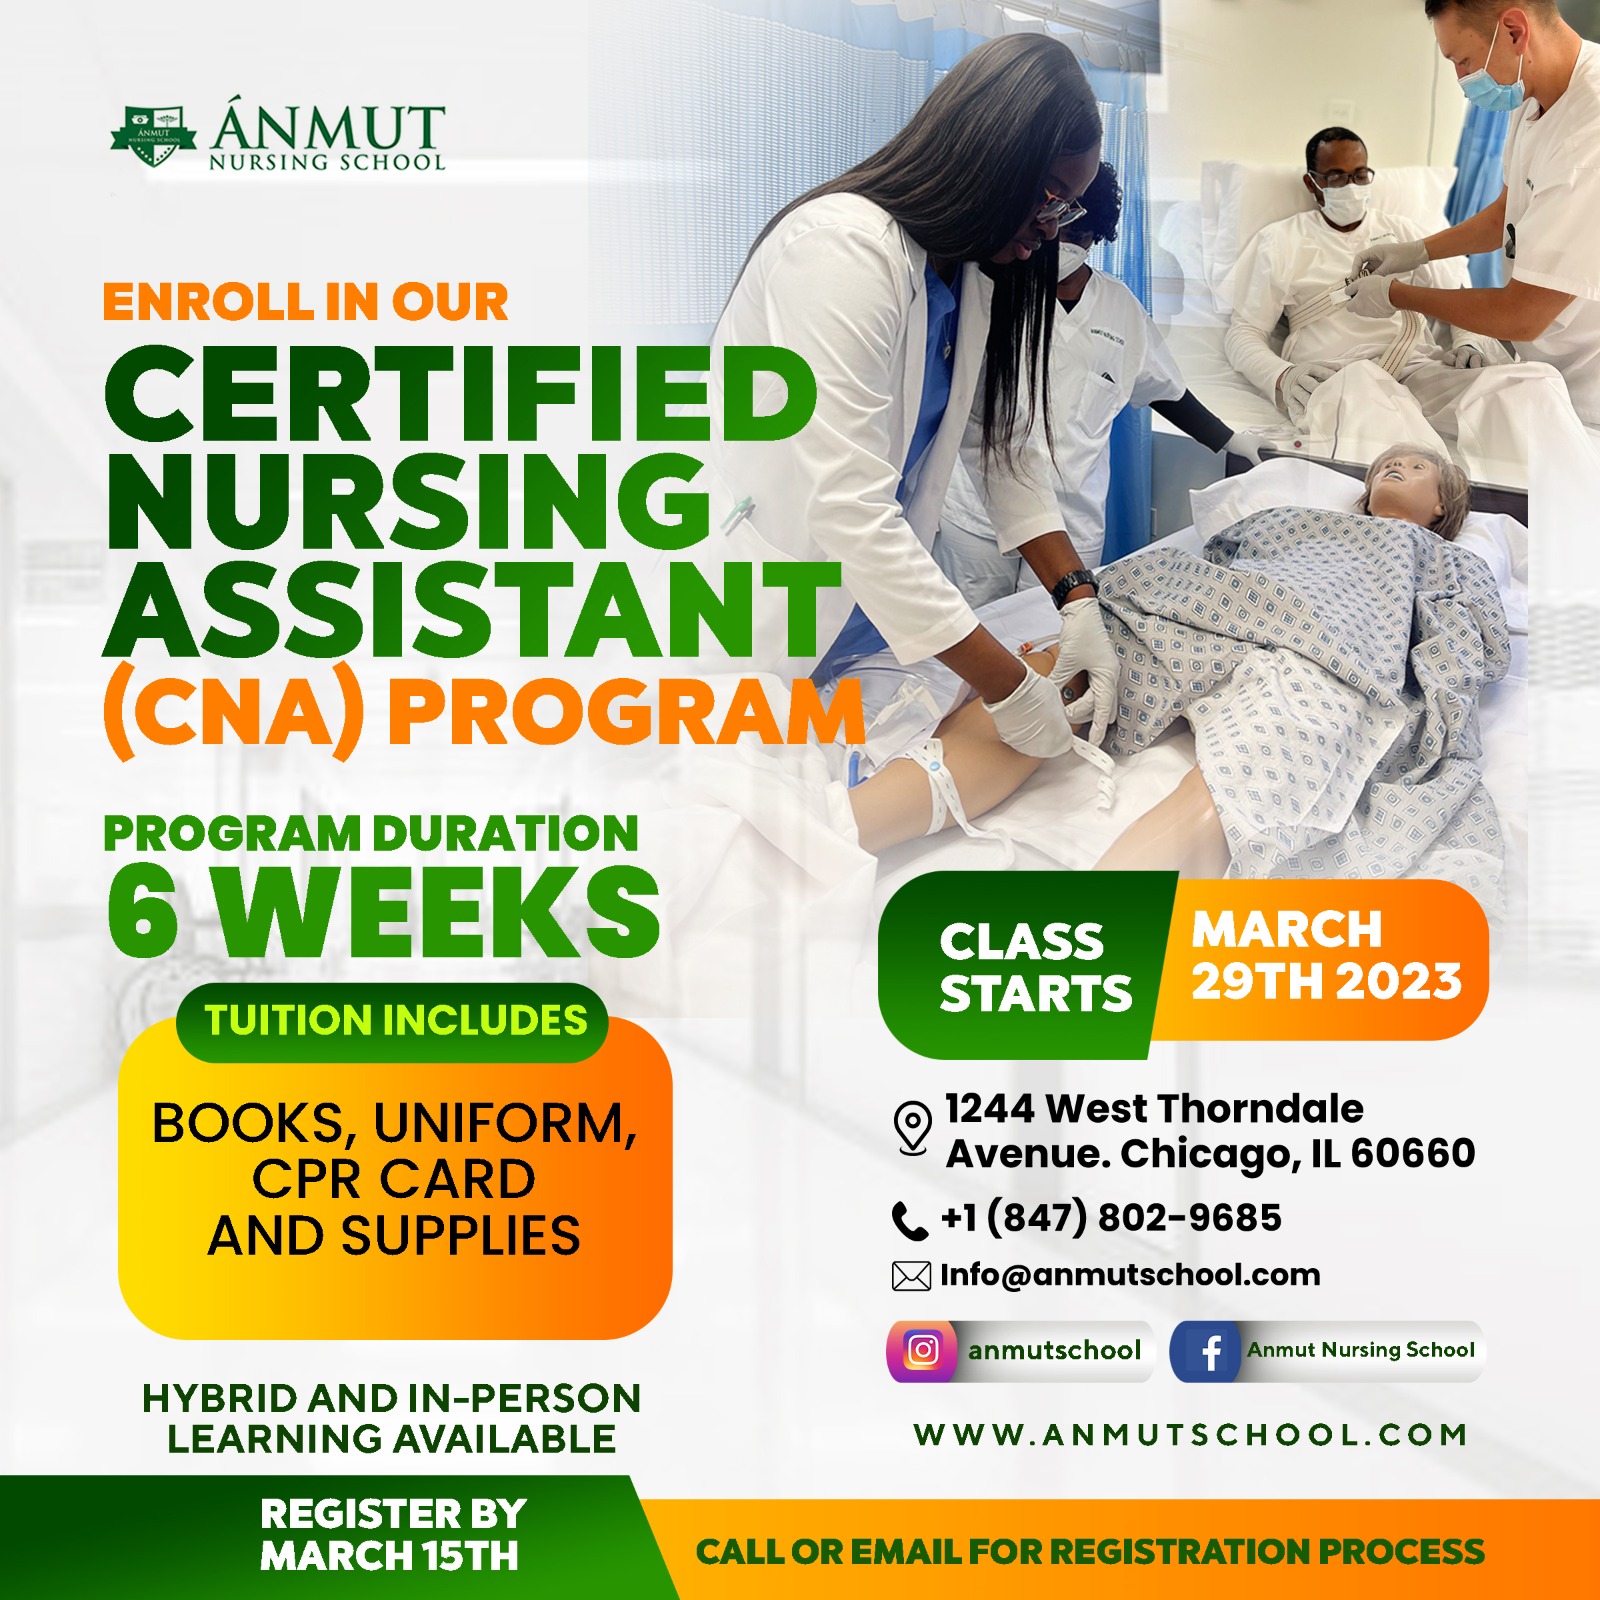 CNA Classes Starts On March 29th 2023